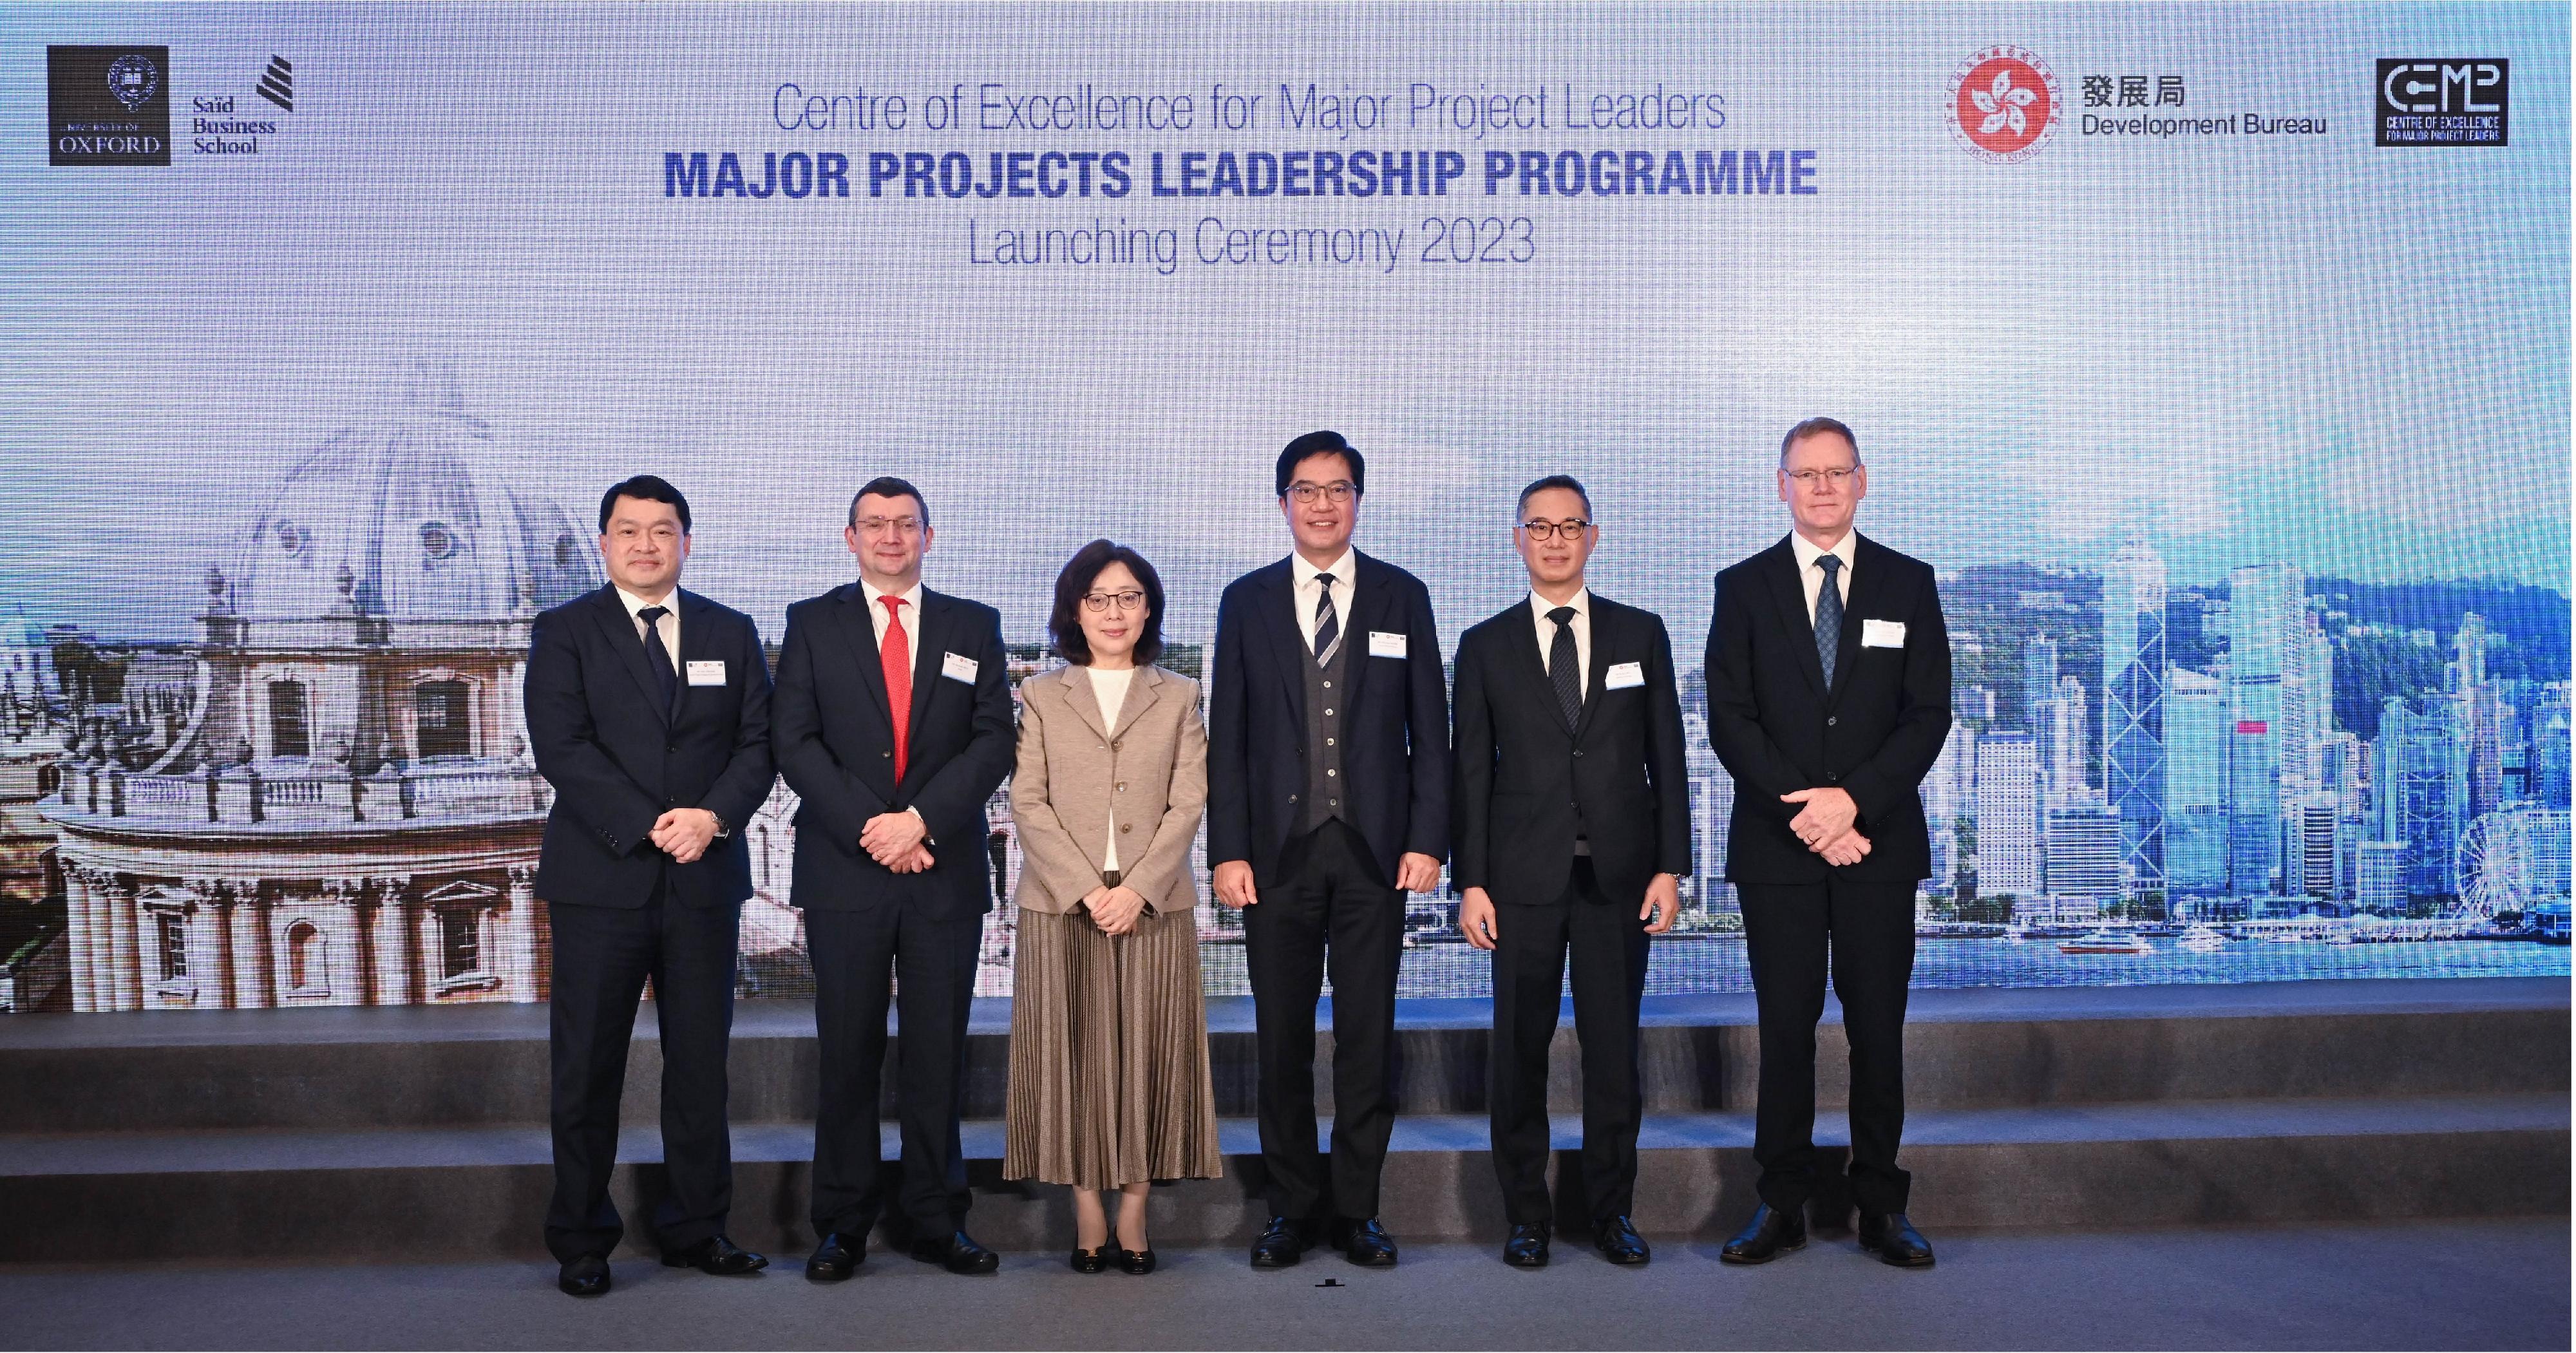 The Centre of Excellence for Major Project Leaders (CoE) under the Development Bureau launched today (January 12) the 2023 Major Projects Leadership Programme. Photo shows the Deputy Financial Secretary and Honorary Vice President of the CoE, Mr Michael Wong (third right); the Secretary for Development and Chairman of the CoE, Ms Bernadette Linn (third left); and the Permanent Secretary for Development (Works) and Superintendent of the CoE, Mr Ricky Lau (second right), with other guests at the launching ceremony.